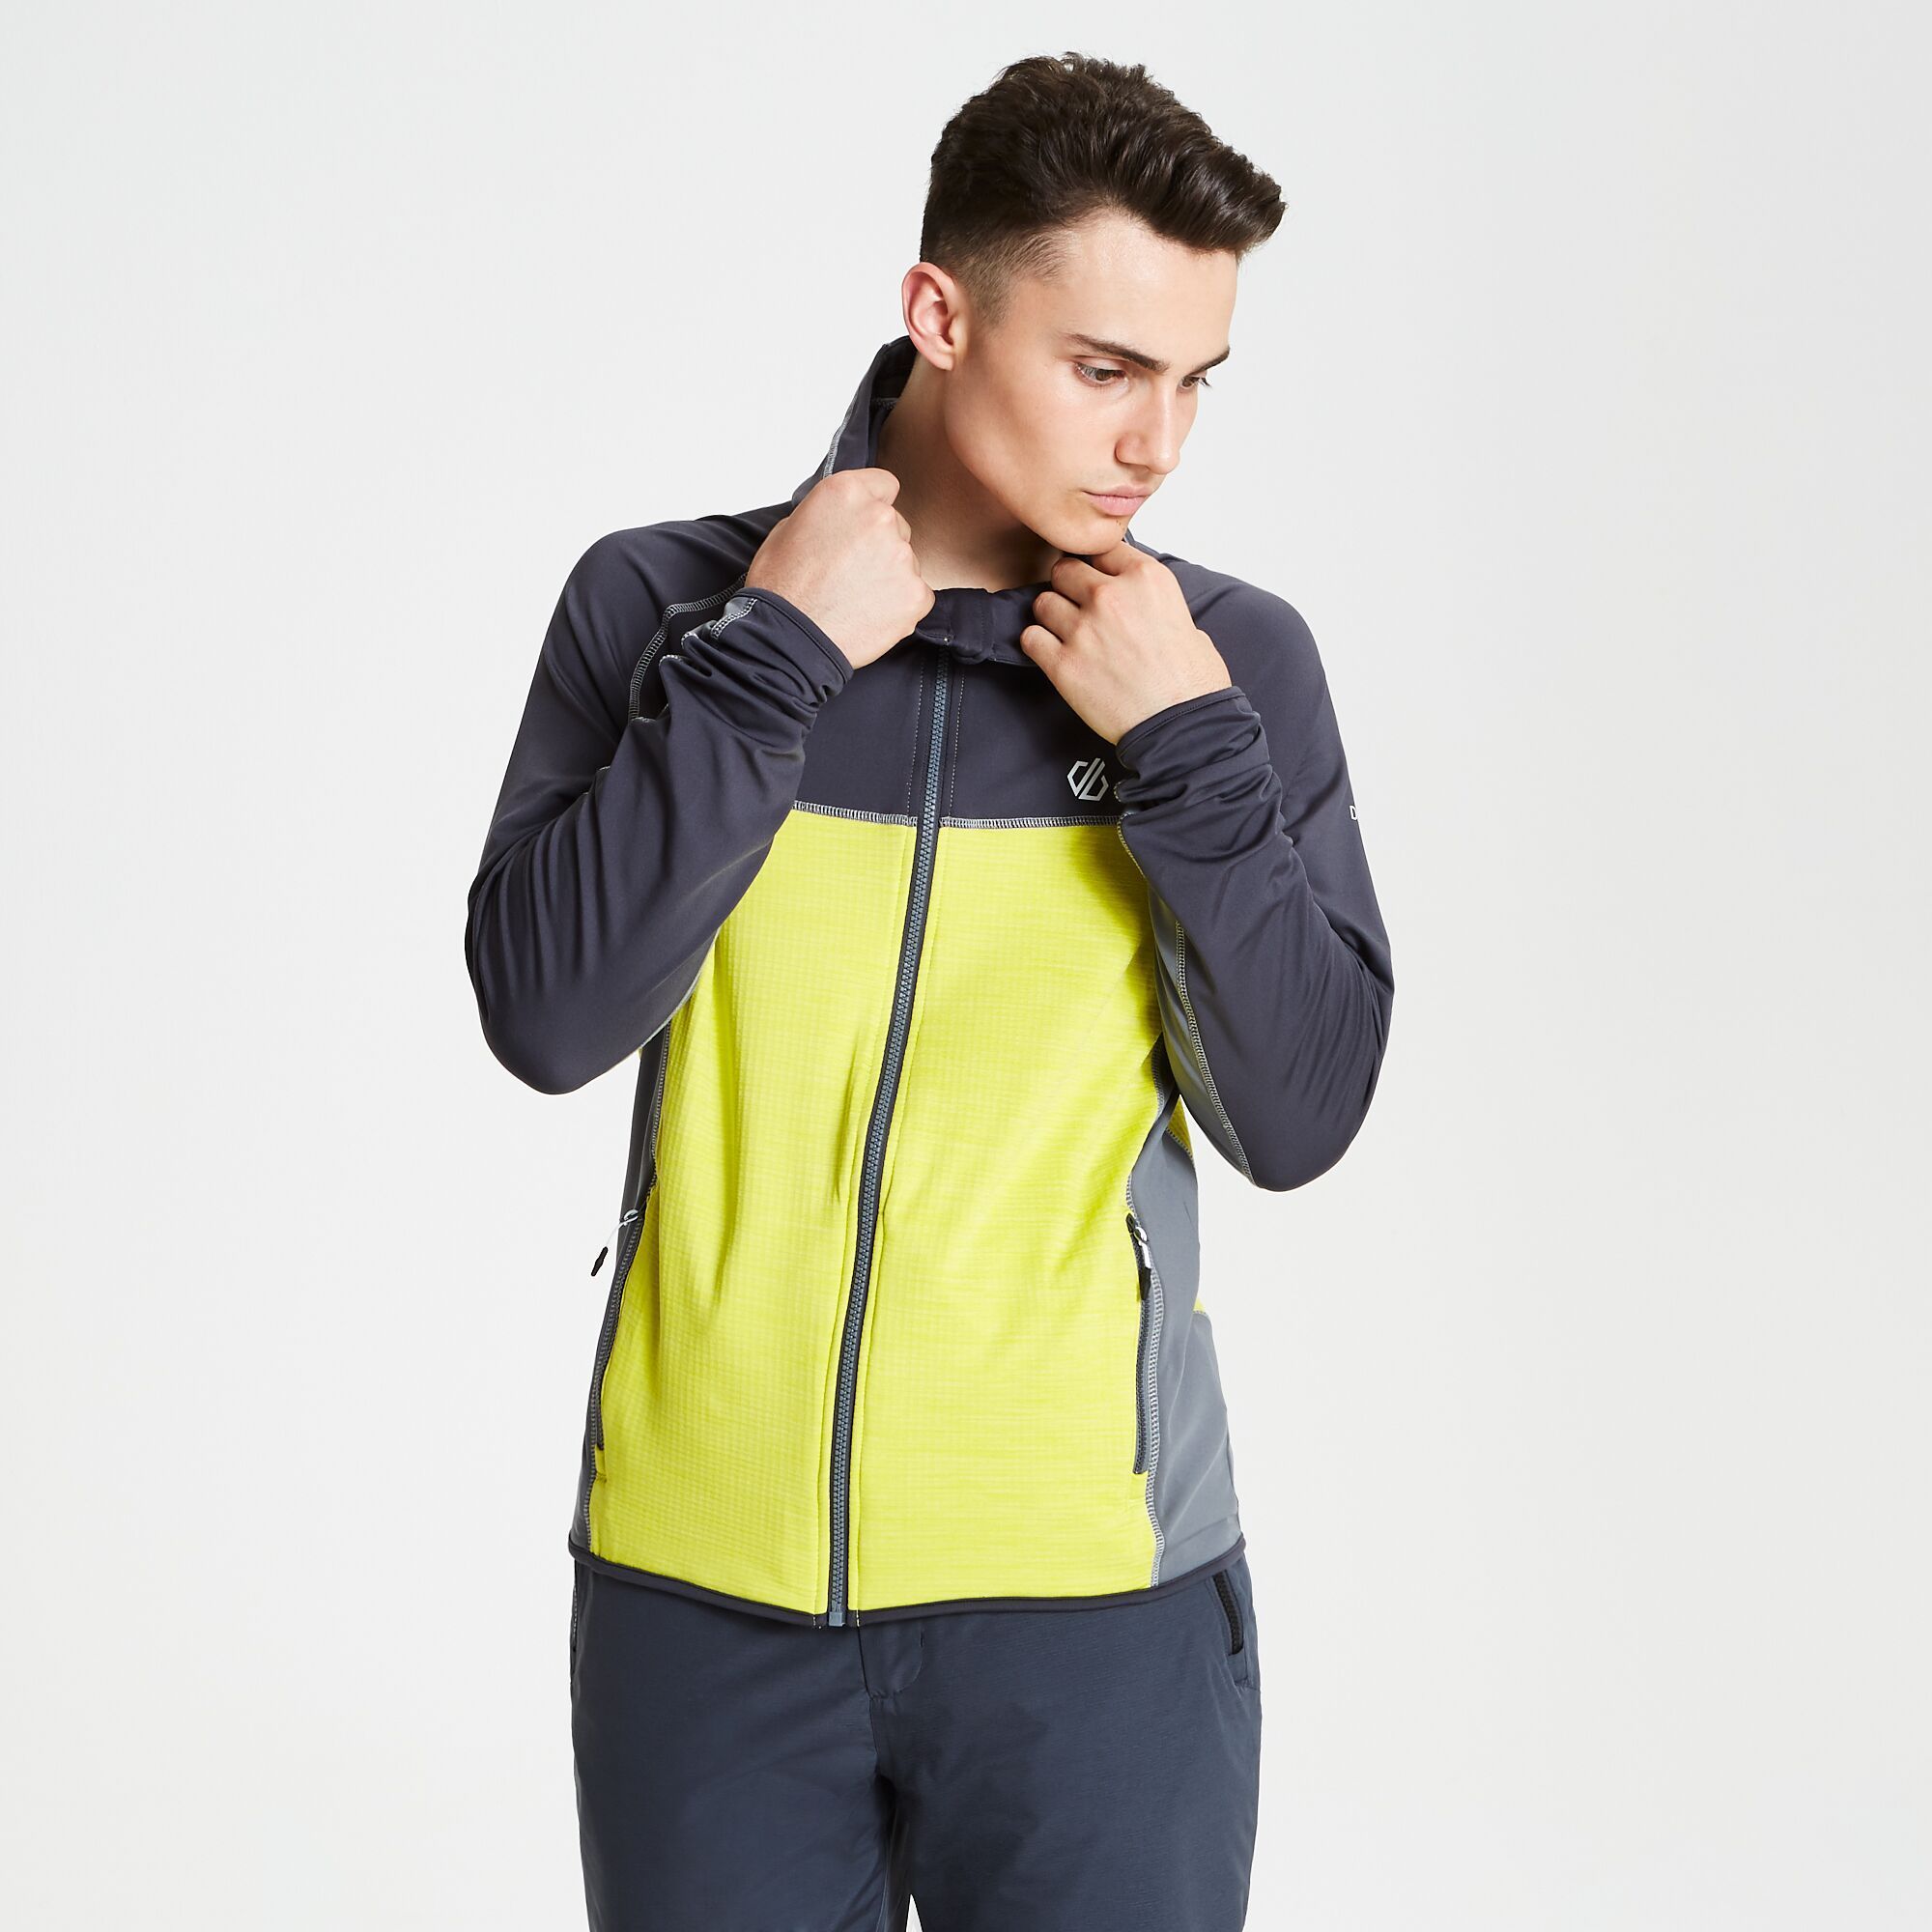 88% polyester, 12% elastane. Lightweight Ilus Core warm backed knitted stretch fabric with marl mix. Quick drying. Grown on hood. Full length zip. Inner zip & chin guard. 2 x lower zip pockets. Stretch binding to cuffs and hem.